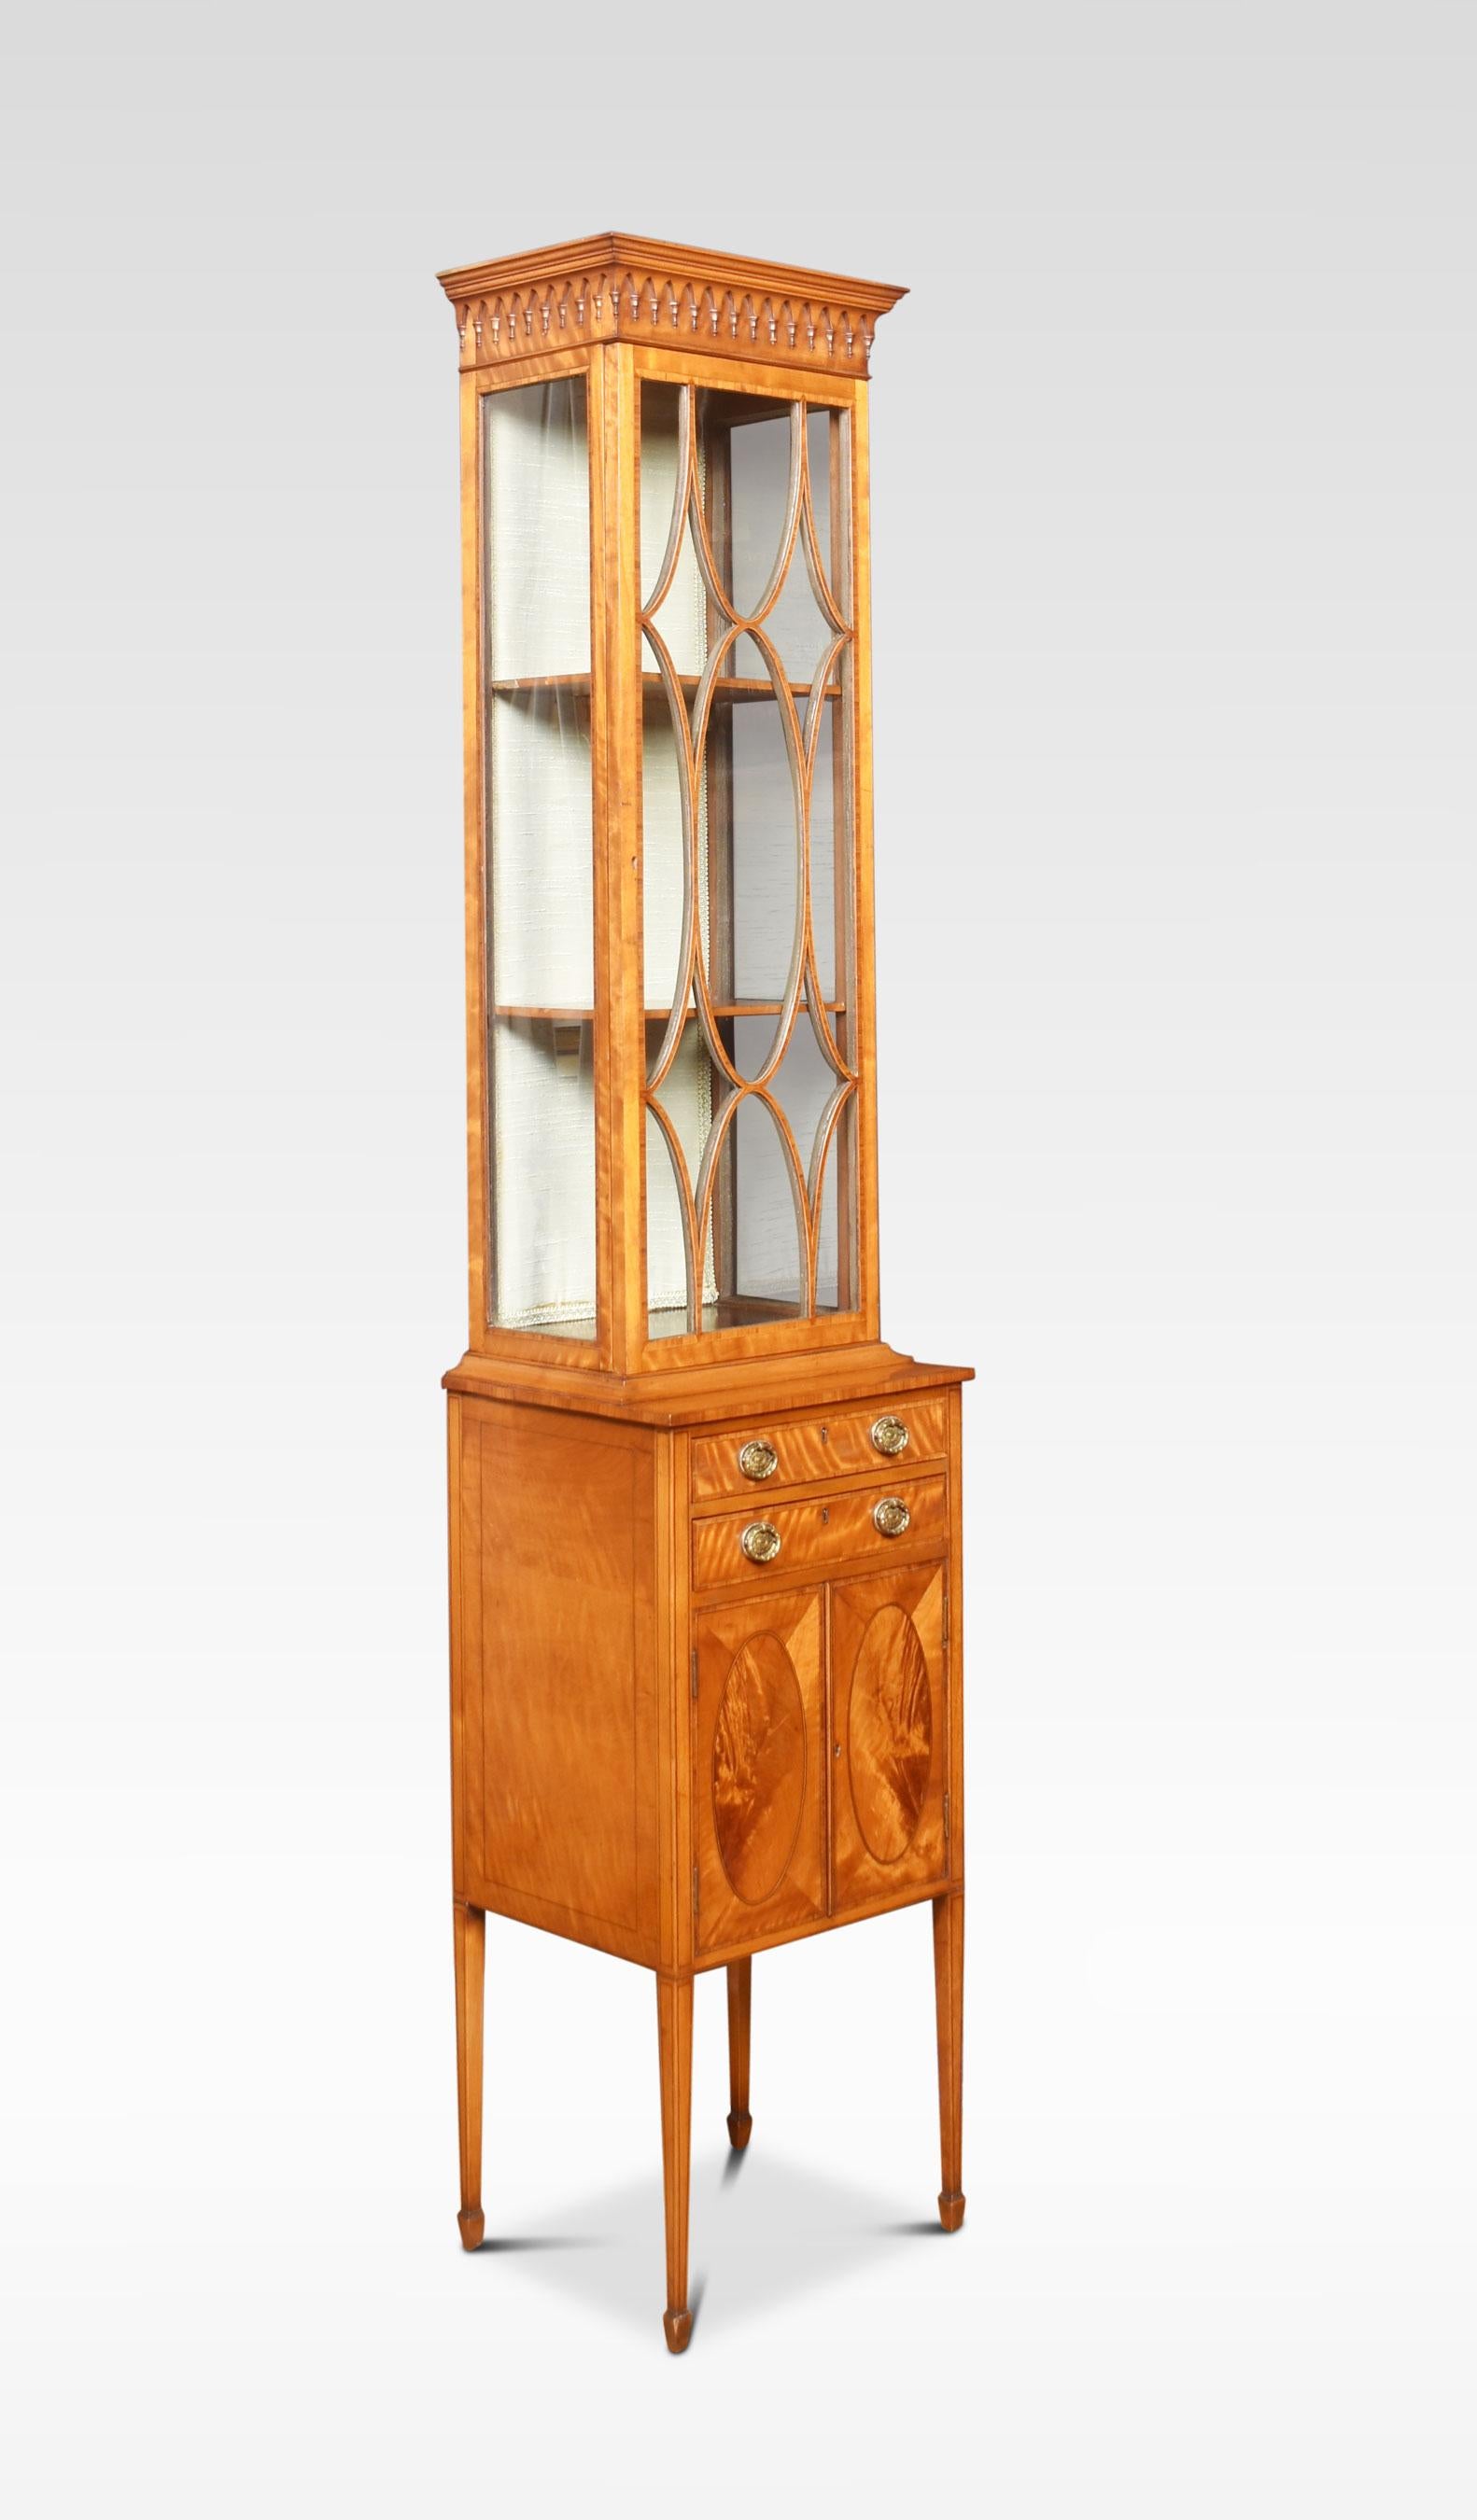 Satinwood display cabinet of small proportions, the molded cornice above carved freeze, to the large rectangular glazed door opening to reveal upholstered shelved interior. The base has a short drawer and brass tooled handles. Above a pair of